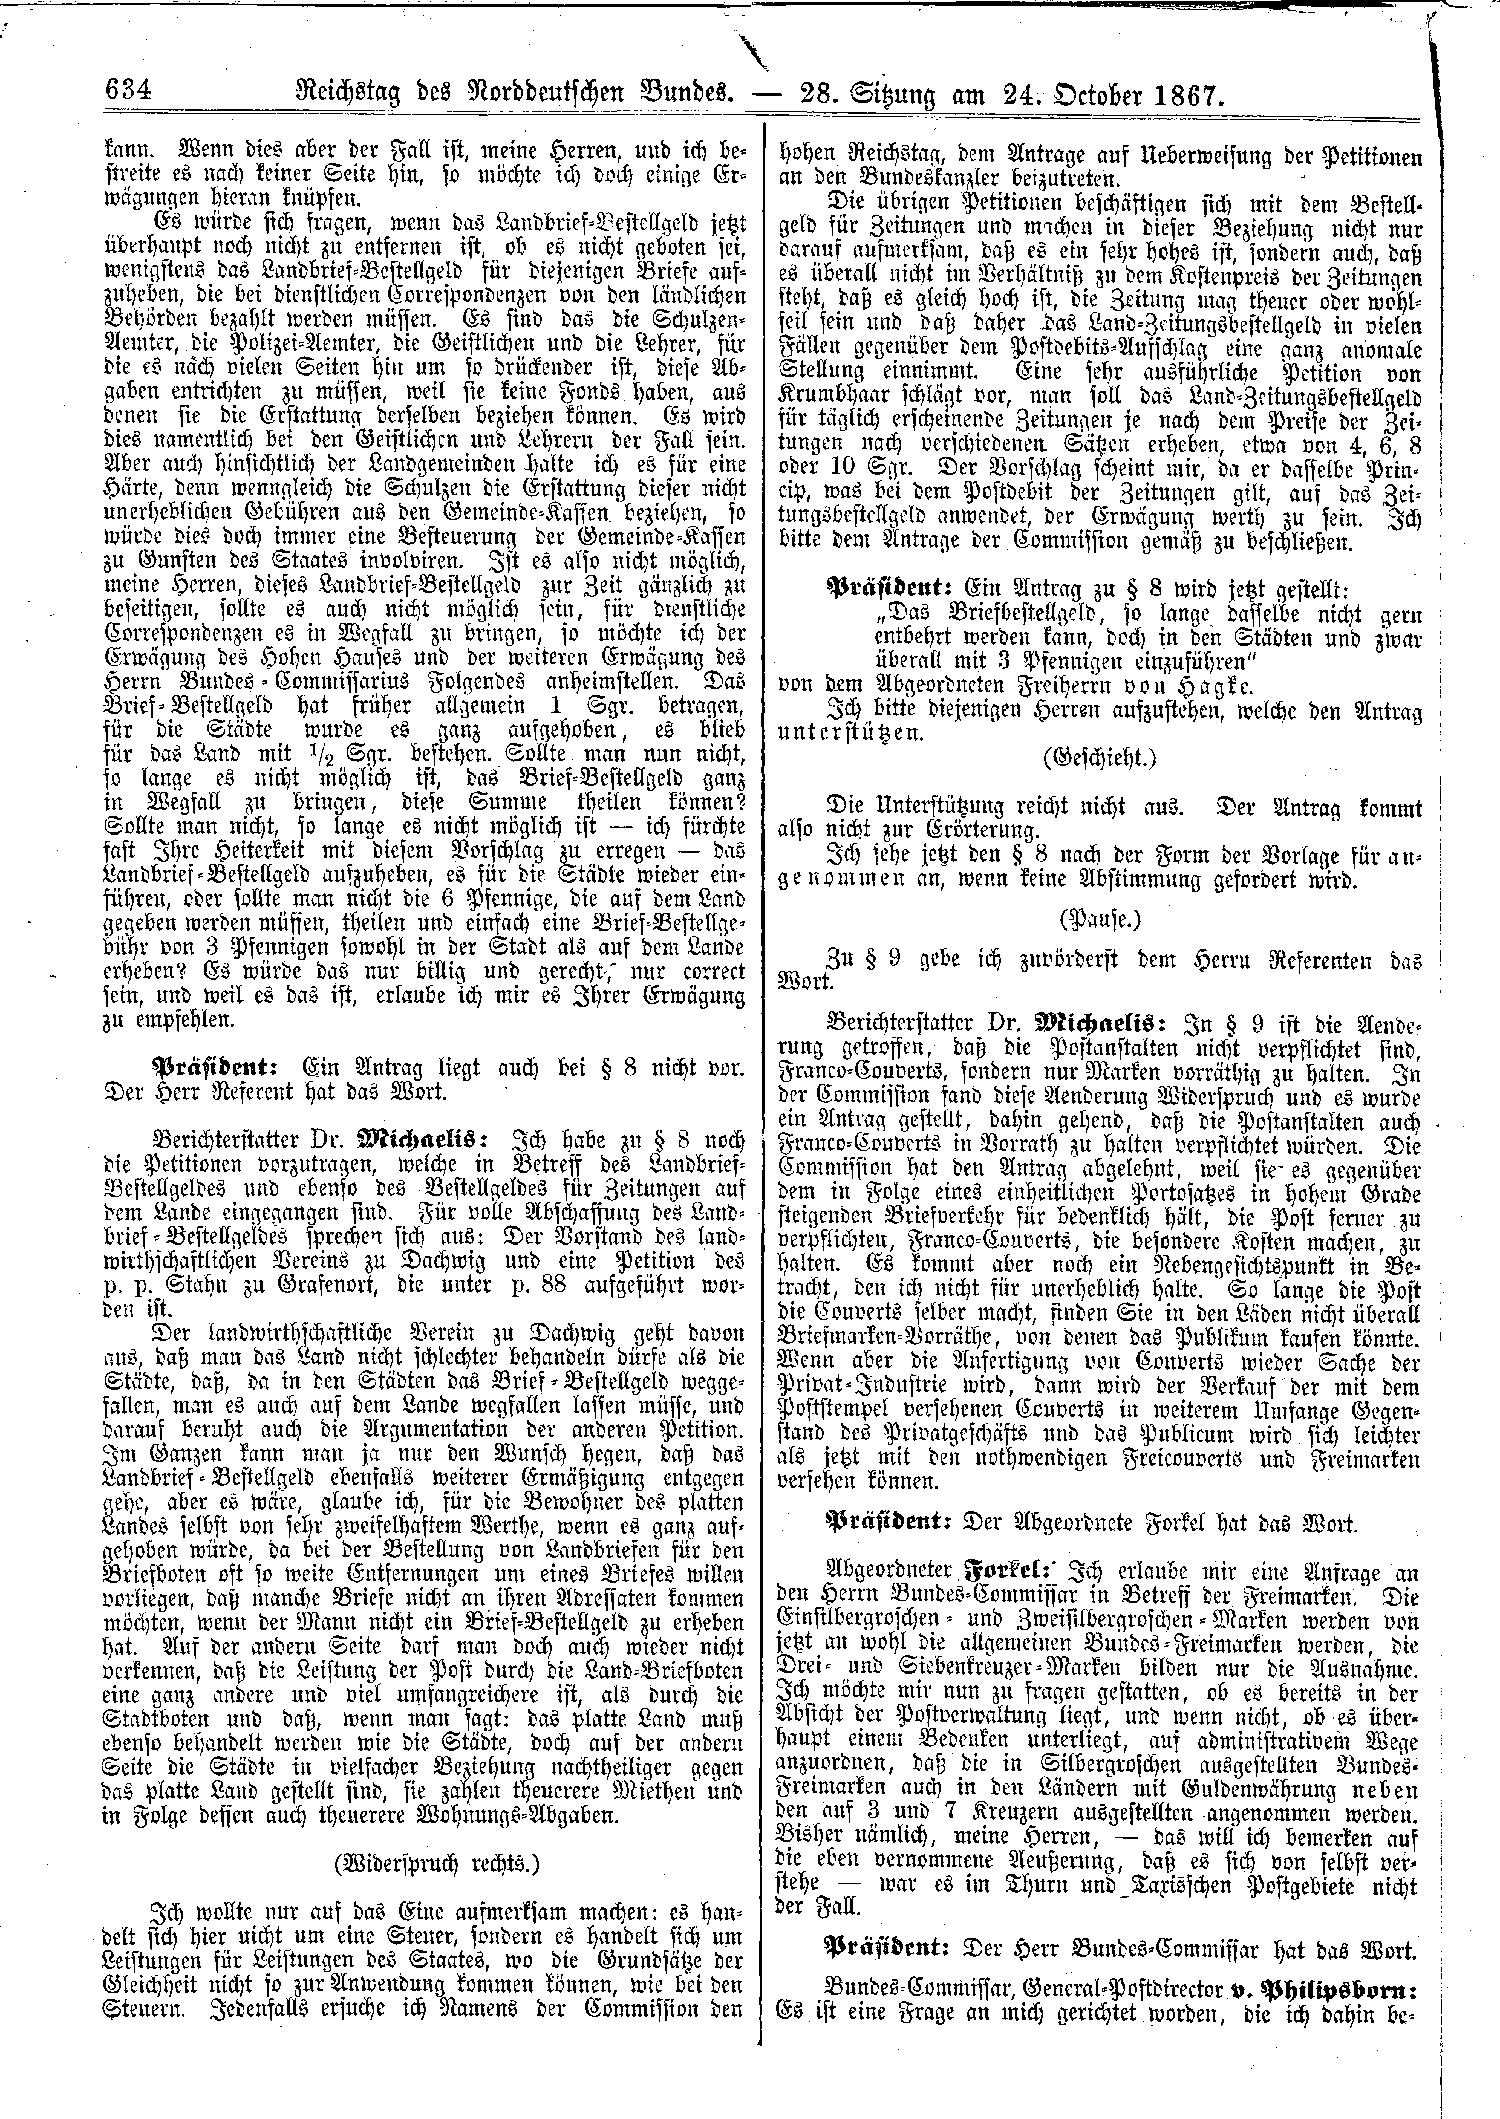 Scan of page 634